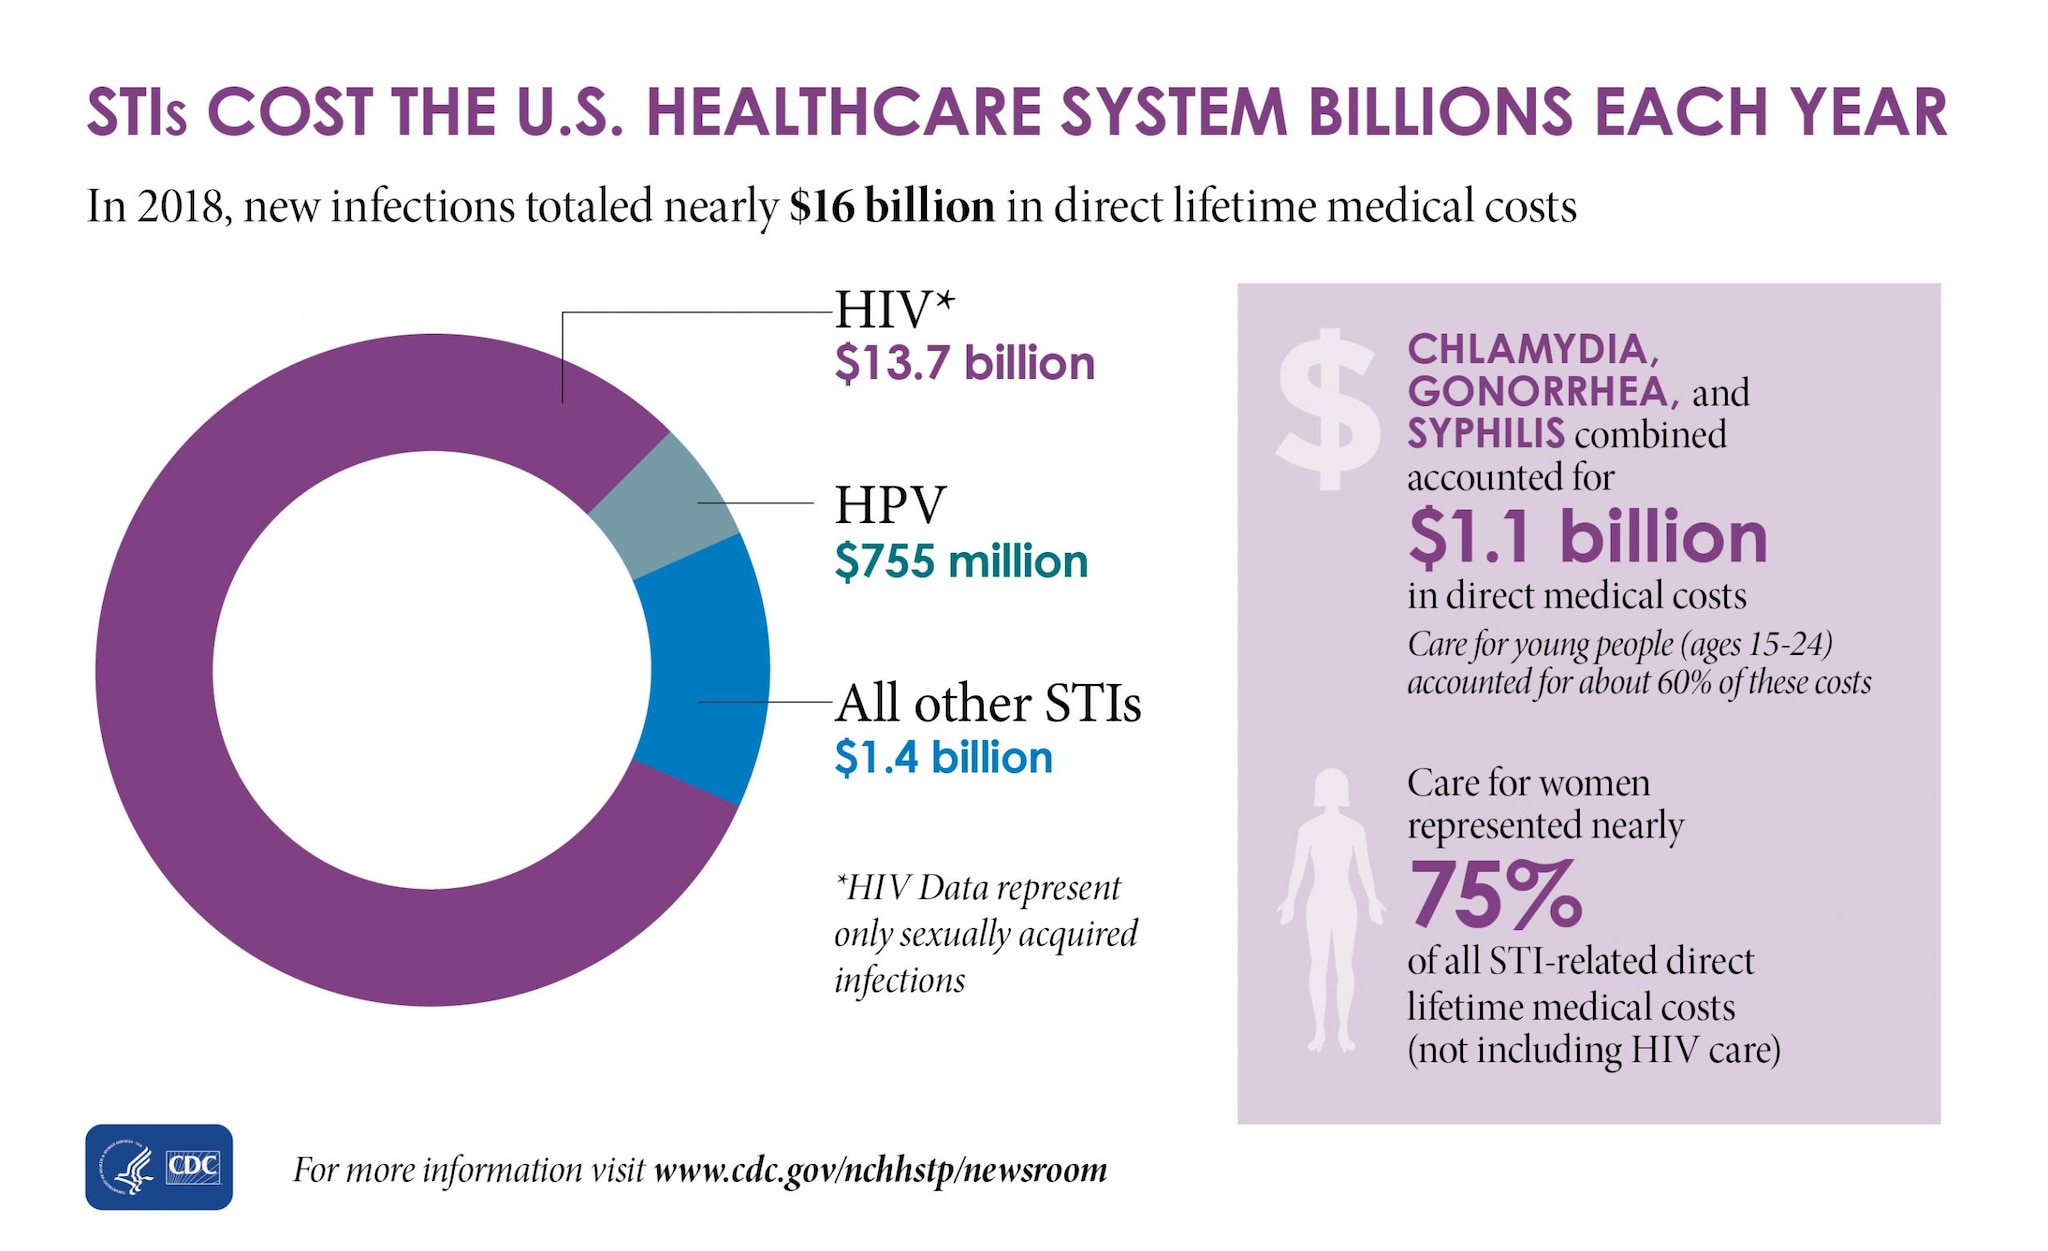 This graphic shows that in 2018, new HIV infections cost $13.7 billion in direct lifetime medical costs, new HPV infections cost $755 million in direct lifetime medical costs, and all other STIs cost $1.4 billion in direct lifetime medical costs.   This graphic shows that chlamydia, gonorrhea, and syphilis combined accounted for $1.1 billion in direct medical costs, and that care for young people (ages 15-24) accounted for about 60%26#37; of these costs.   This graphic shows that care for women represented nearly 75%26#37; of all STI-related direct lifetime medical costs (not including HIV care).   This graphic shows that HIV data represent only sexually acquired infections. 